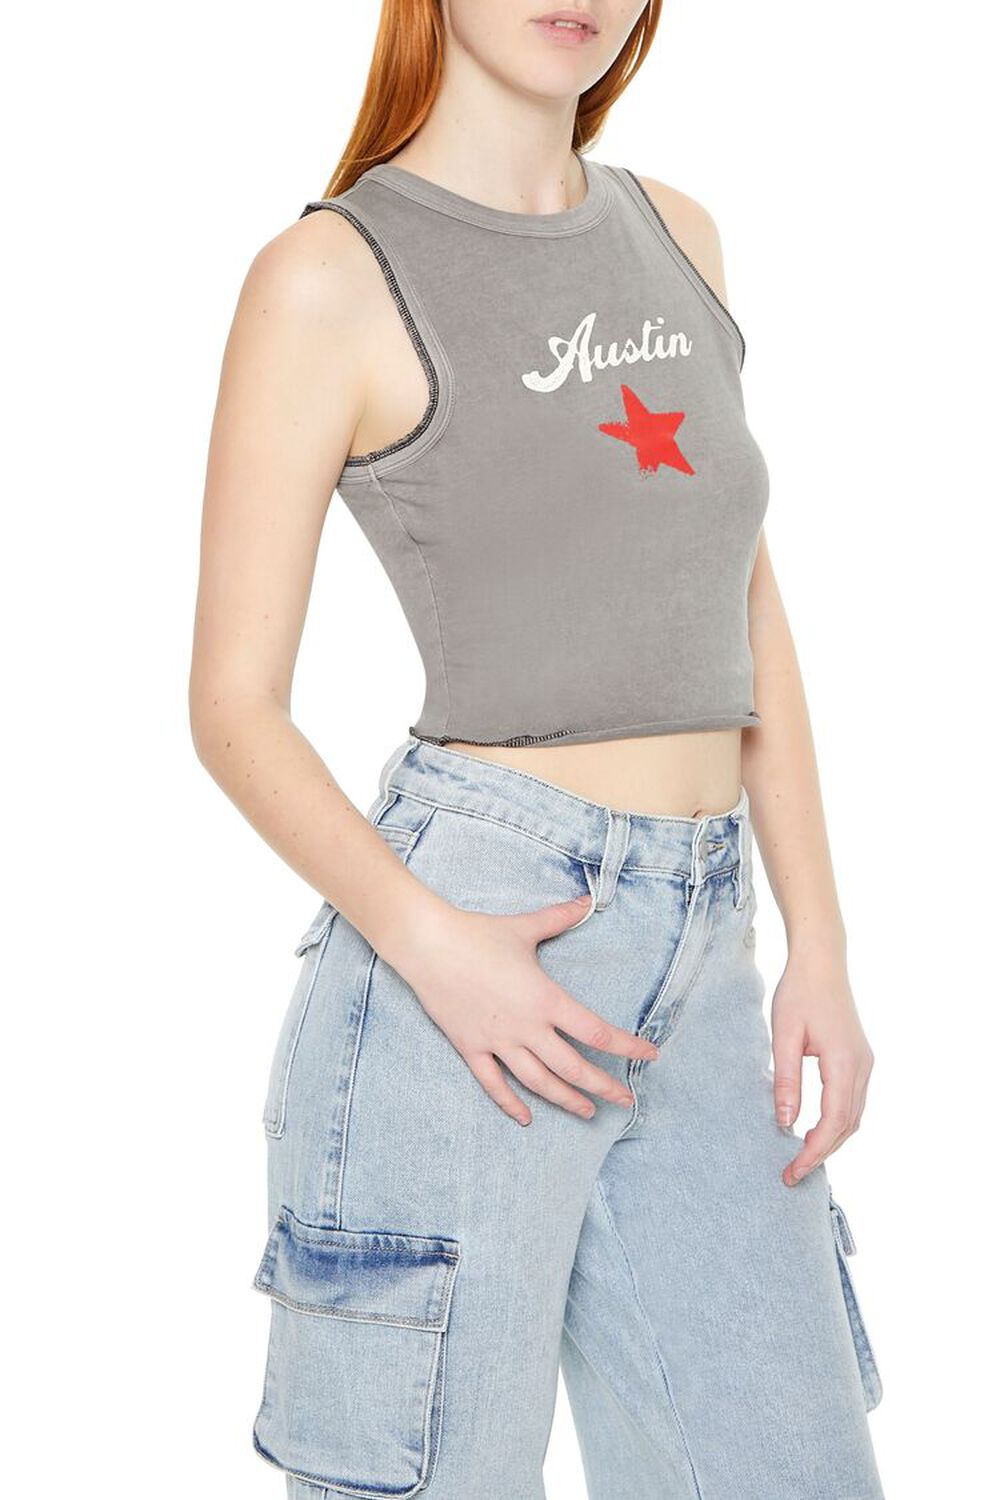 CHARCOAL/MULTI Cropped Austin Graphic Tank Top, image 2